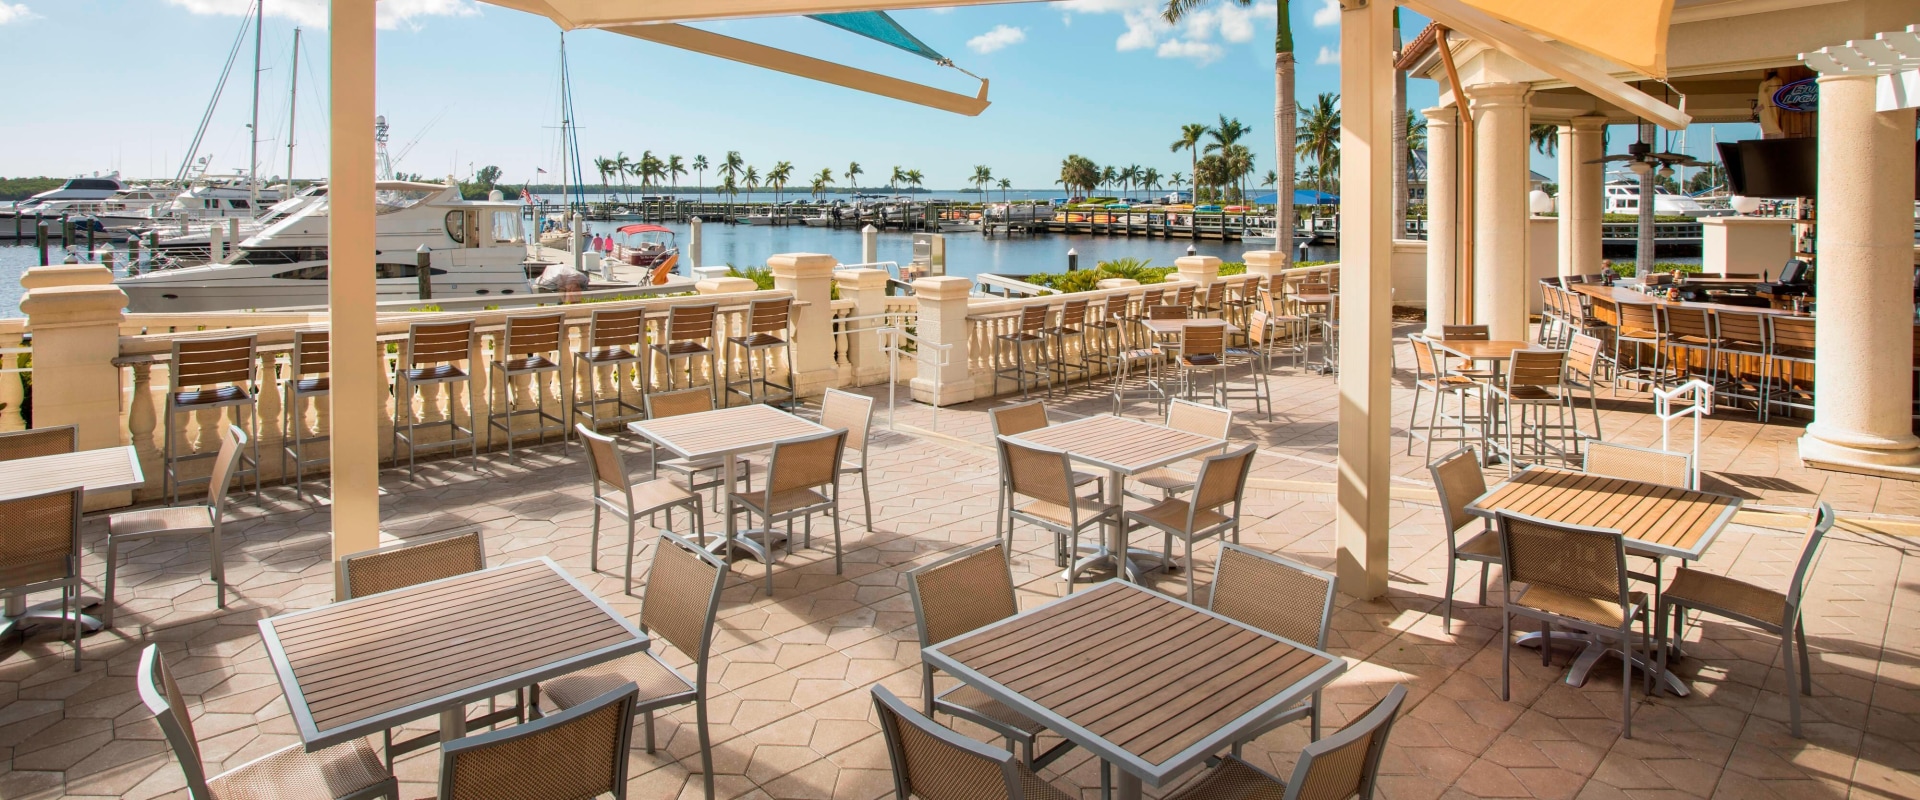 The Ultimate Guide to Waterfront Dining in Cape Coral, FL